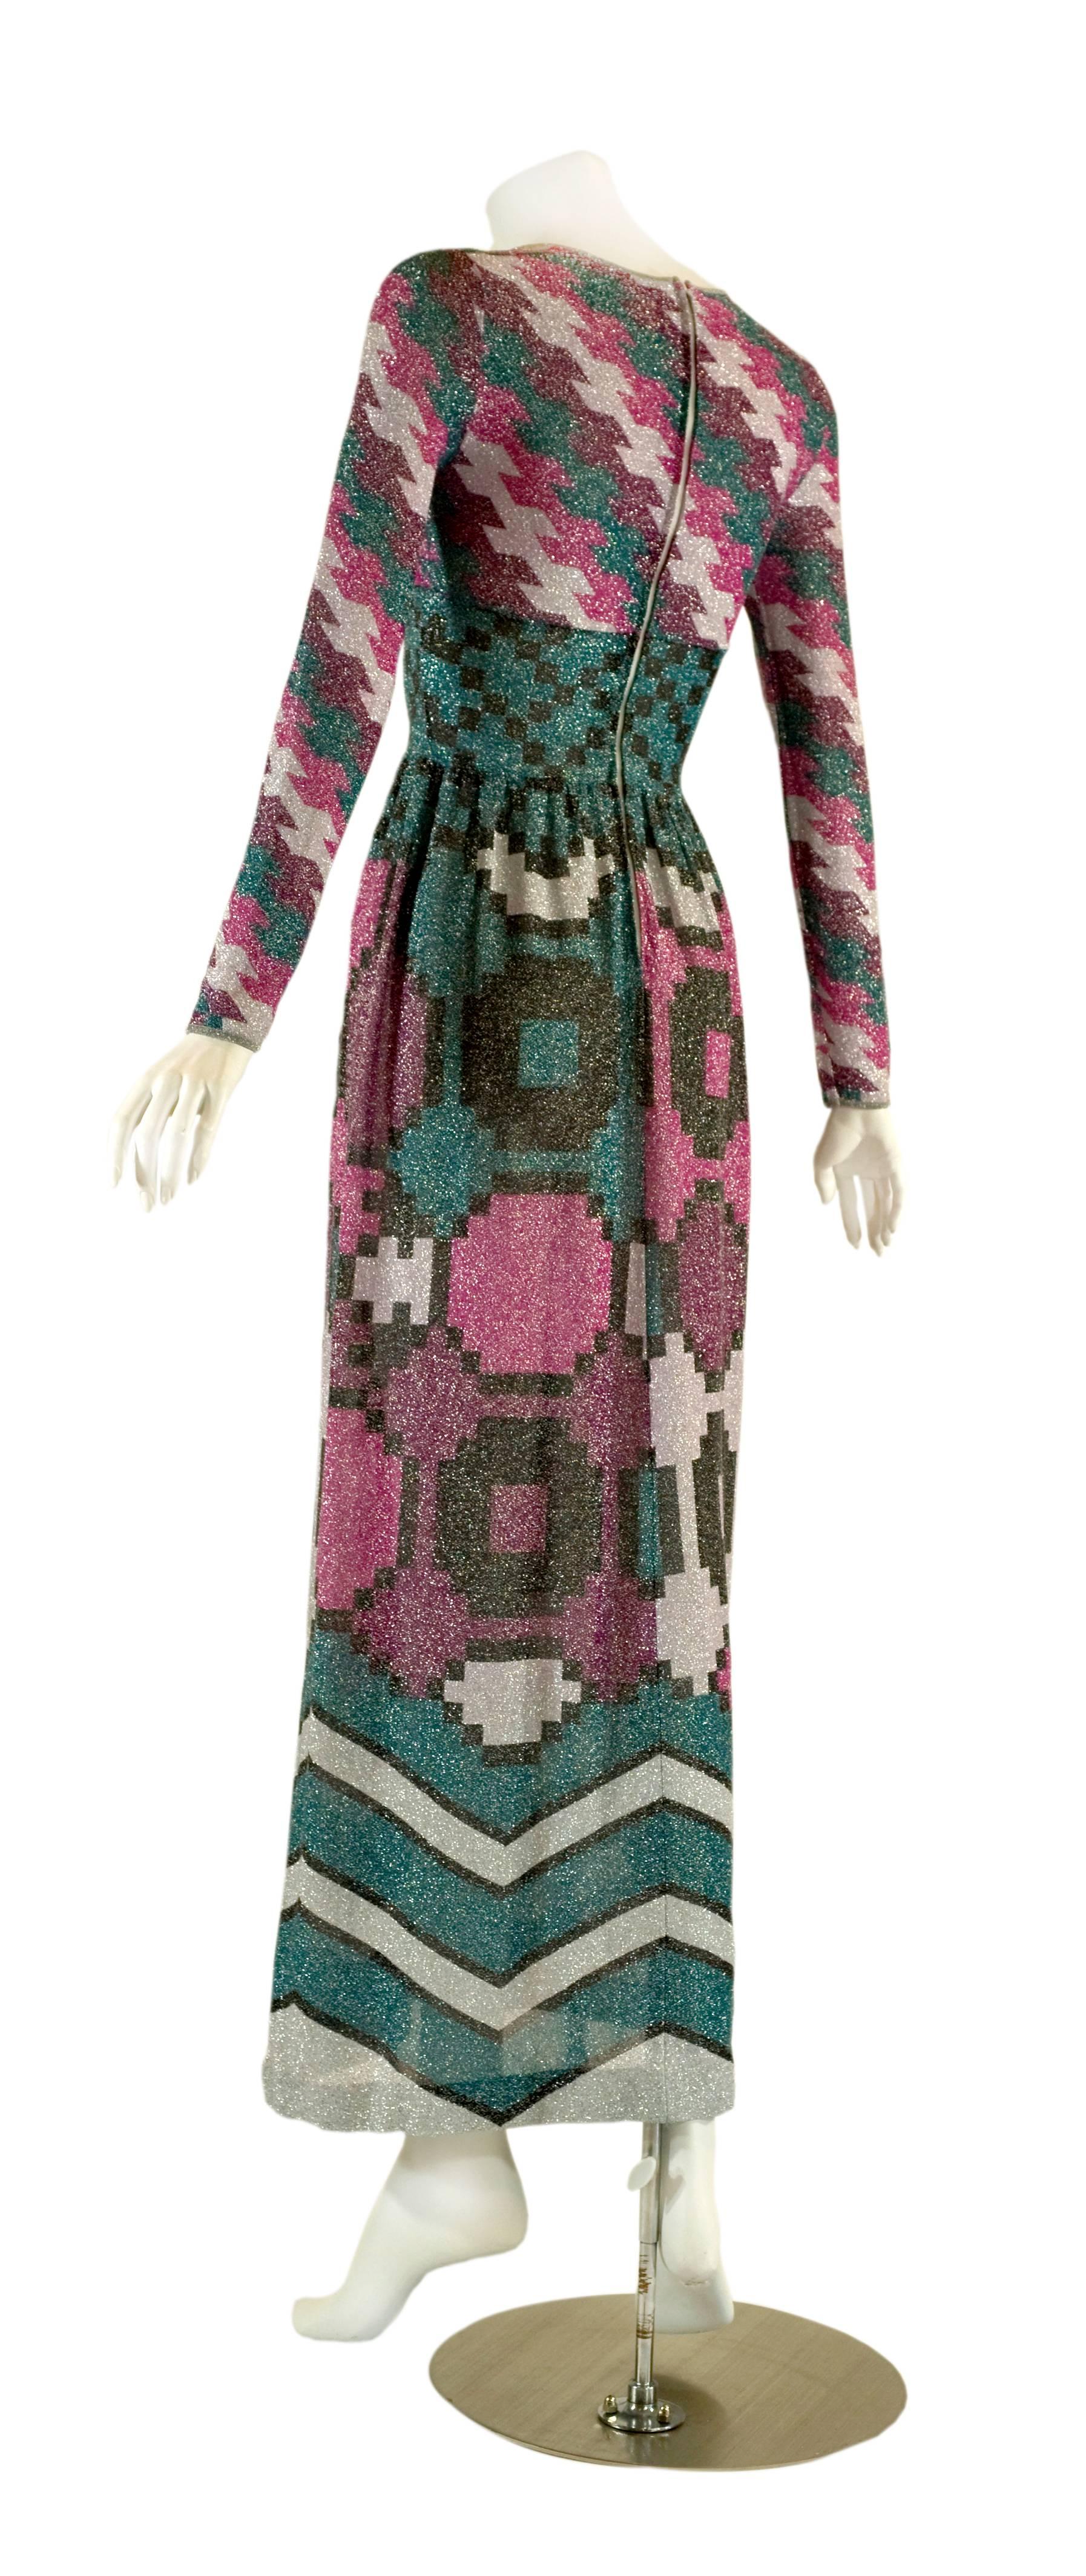 This is a fantastic vintage Lanvin dress done in a lightweight metallic knit. I love the colors and the graphic print. A brilliant mix of raspberry, pink, teal, silver and black, worked into four different prints that flow into each other. The